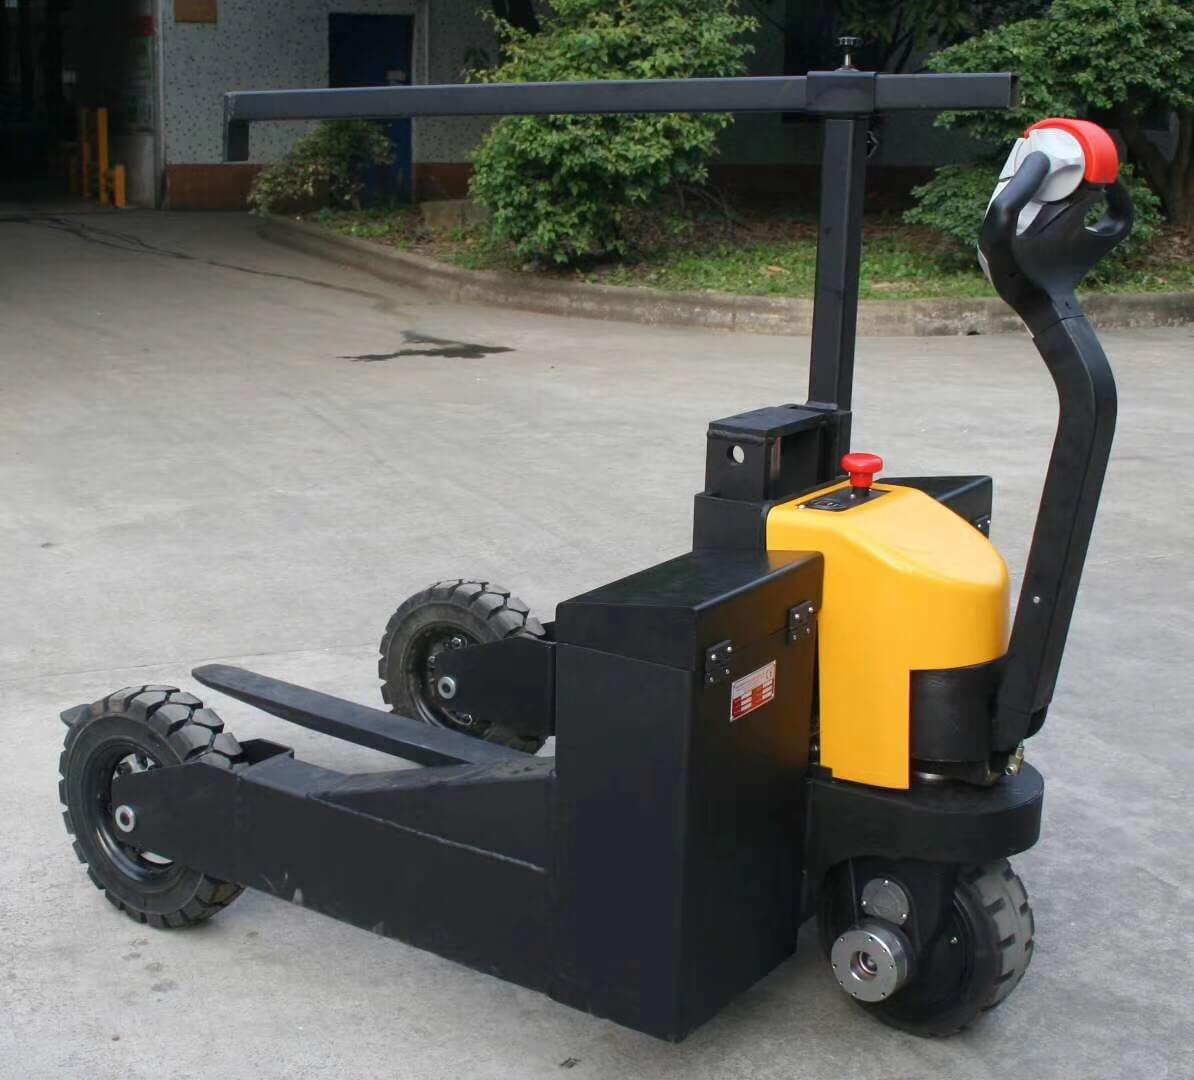 off-road pallet truck with electric or motor drive-1.jpg